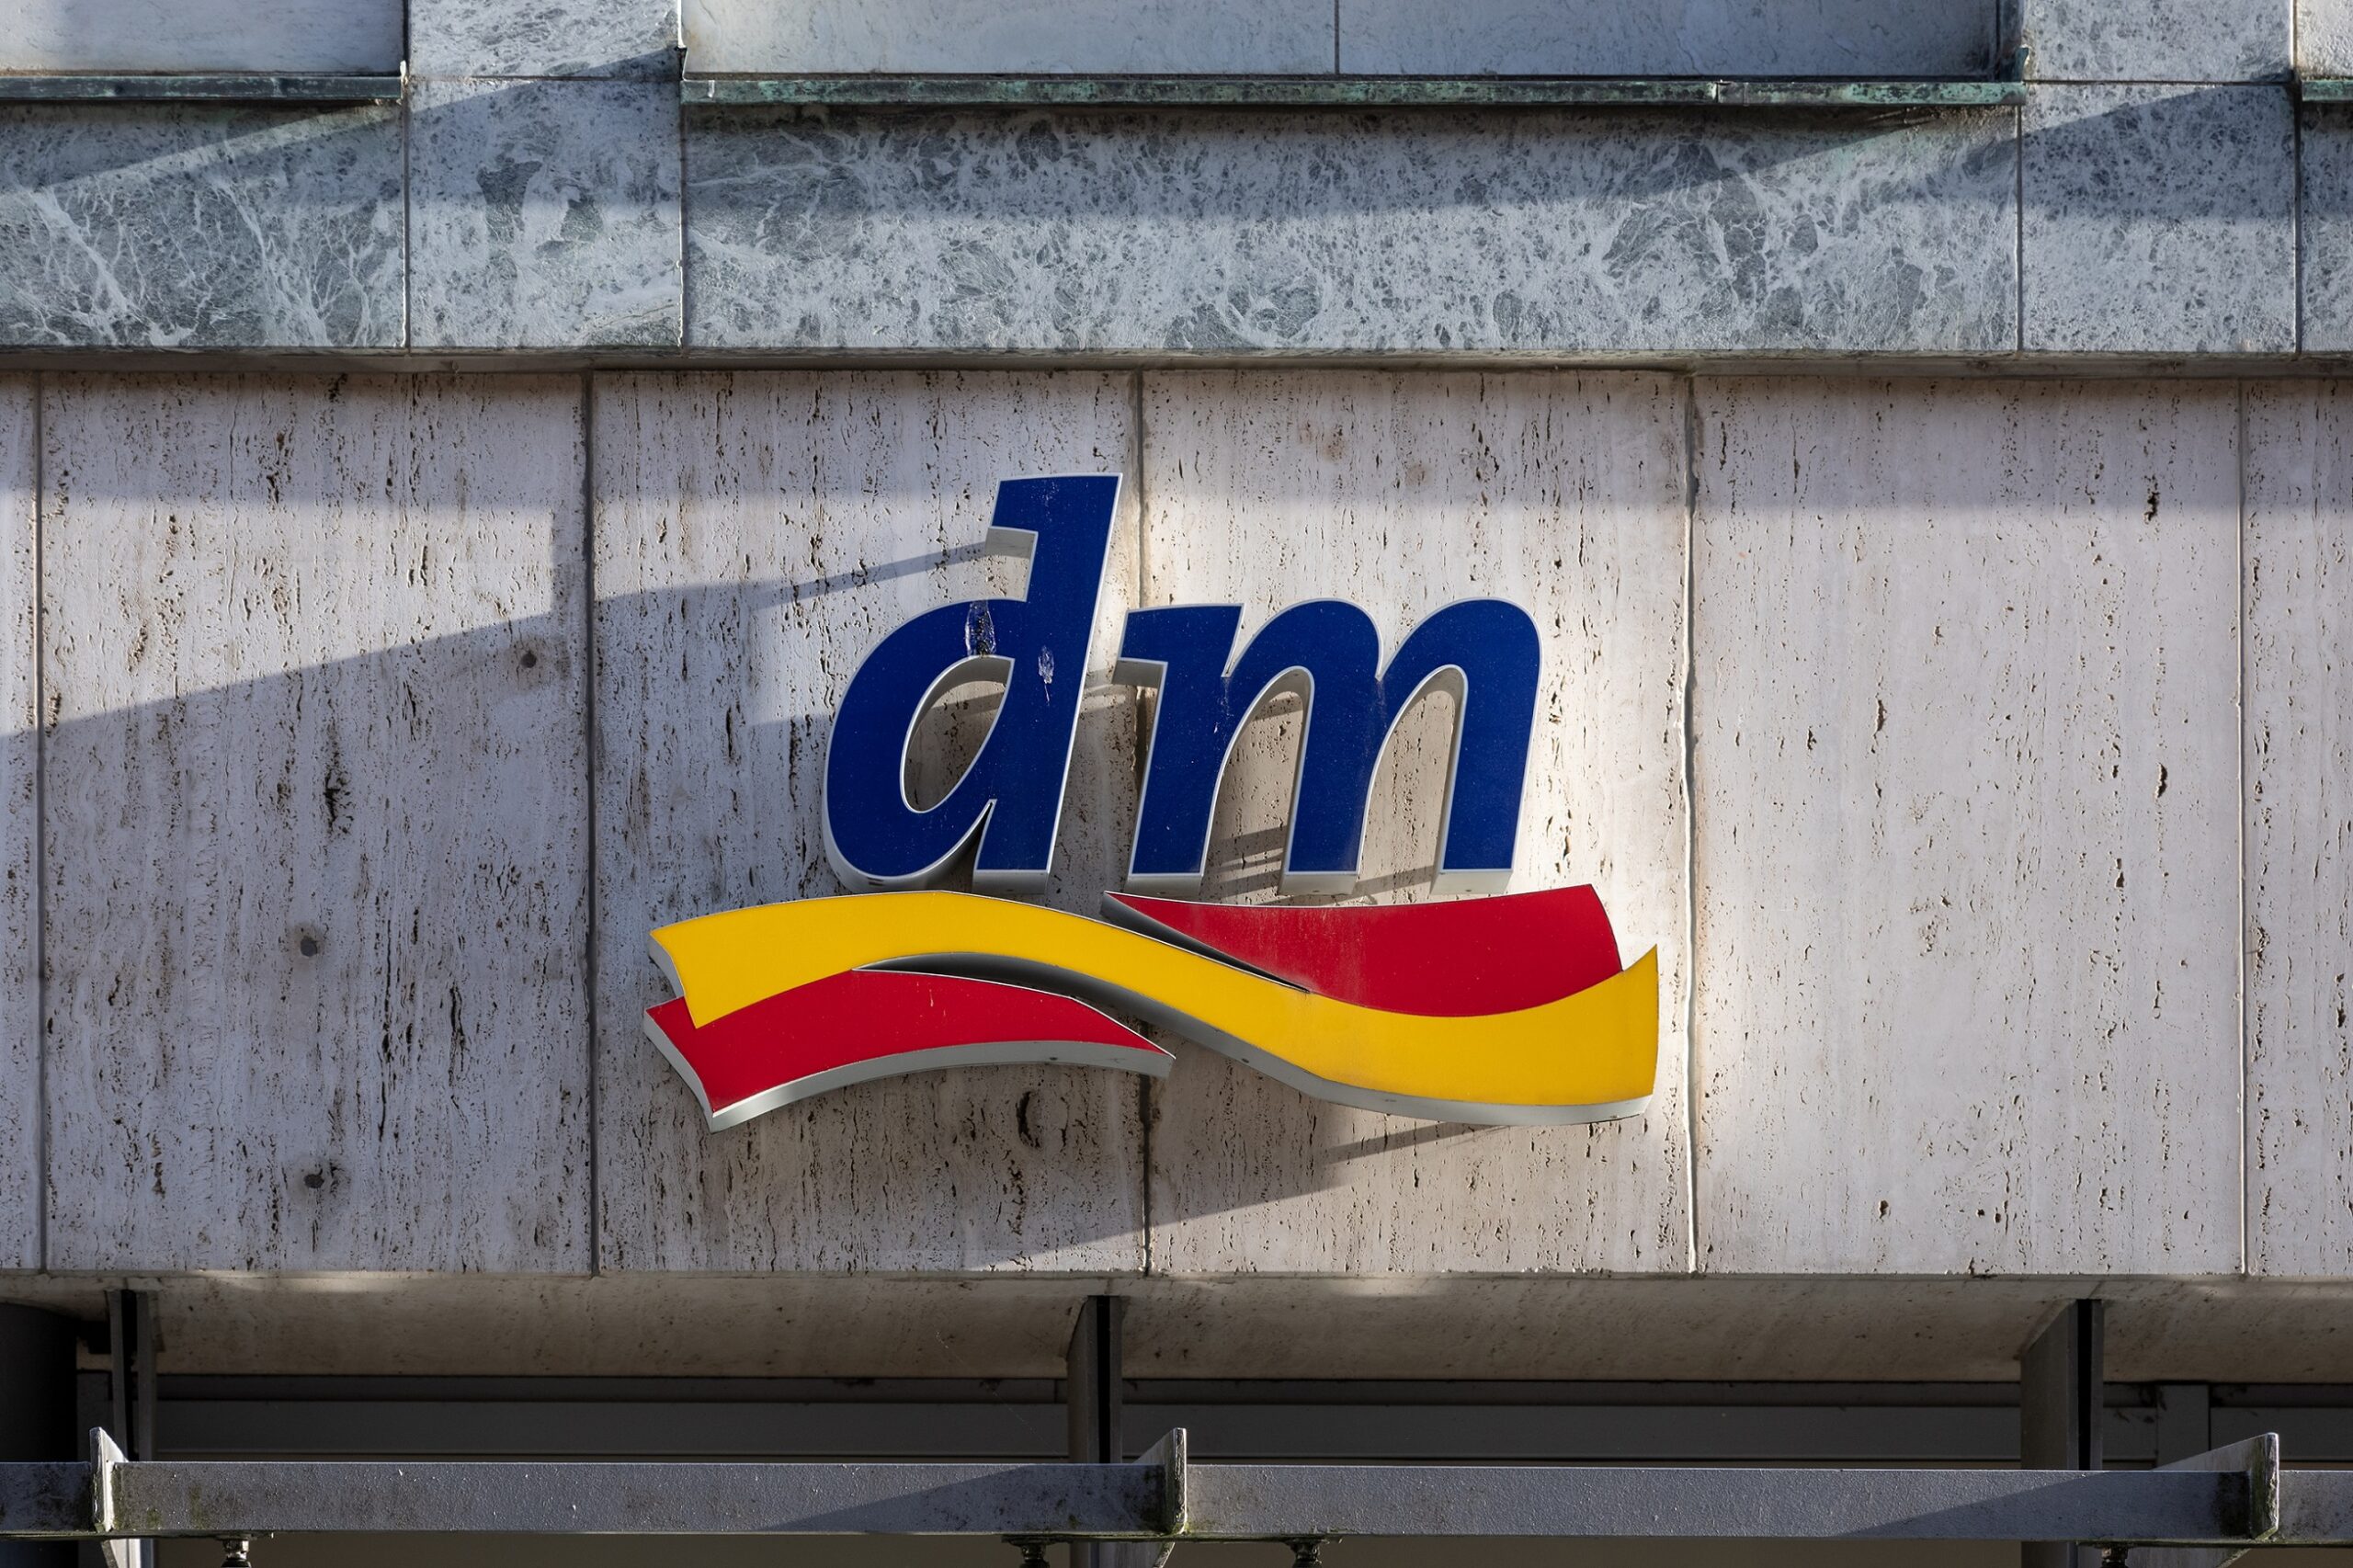 Recall at dm because of mold toxins